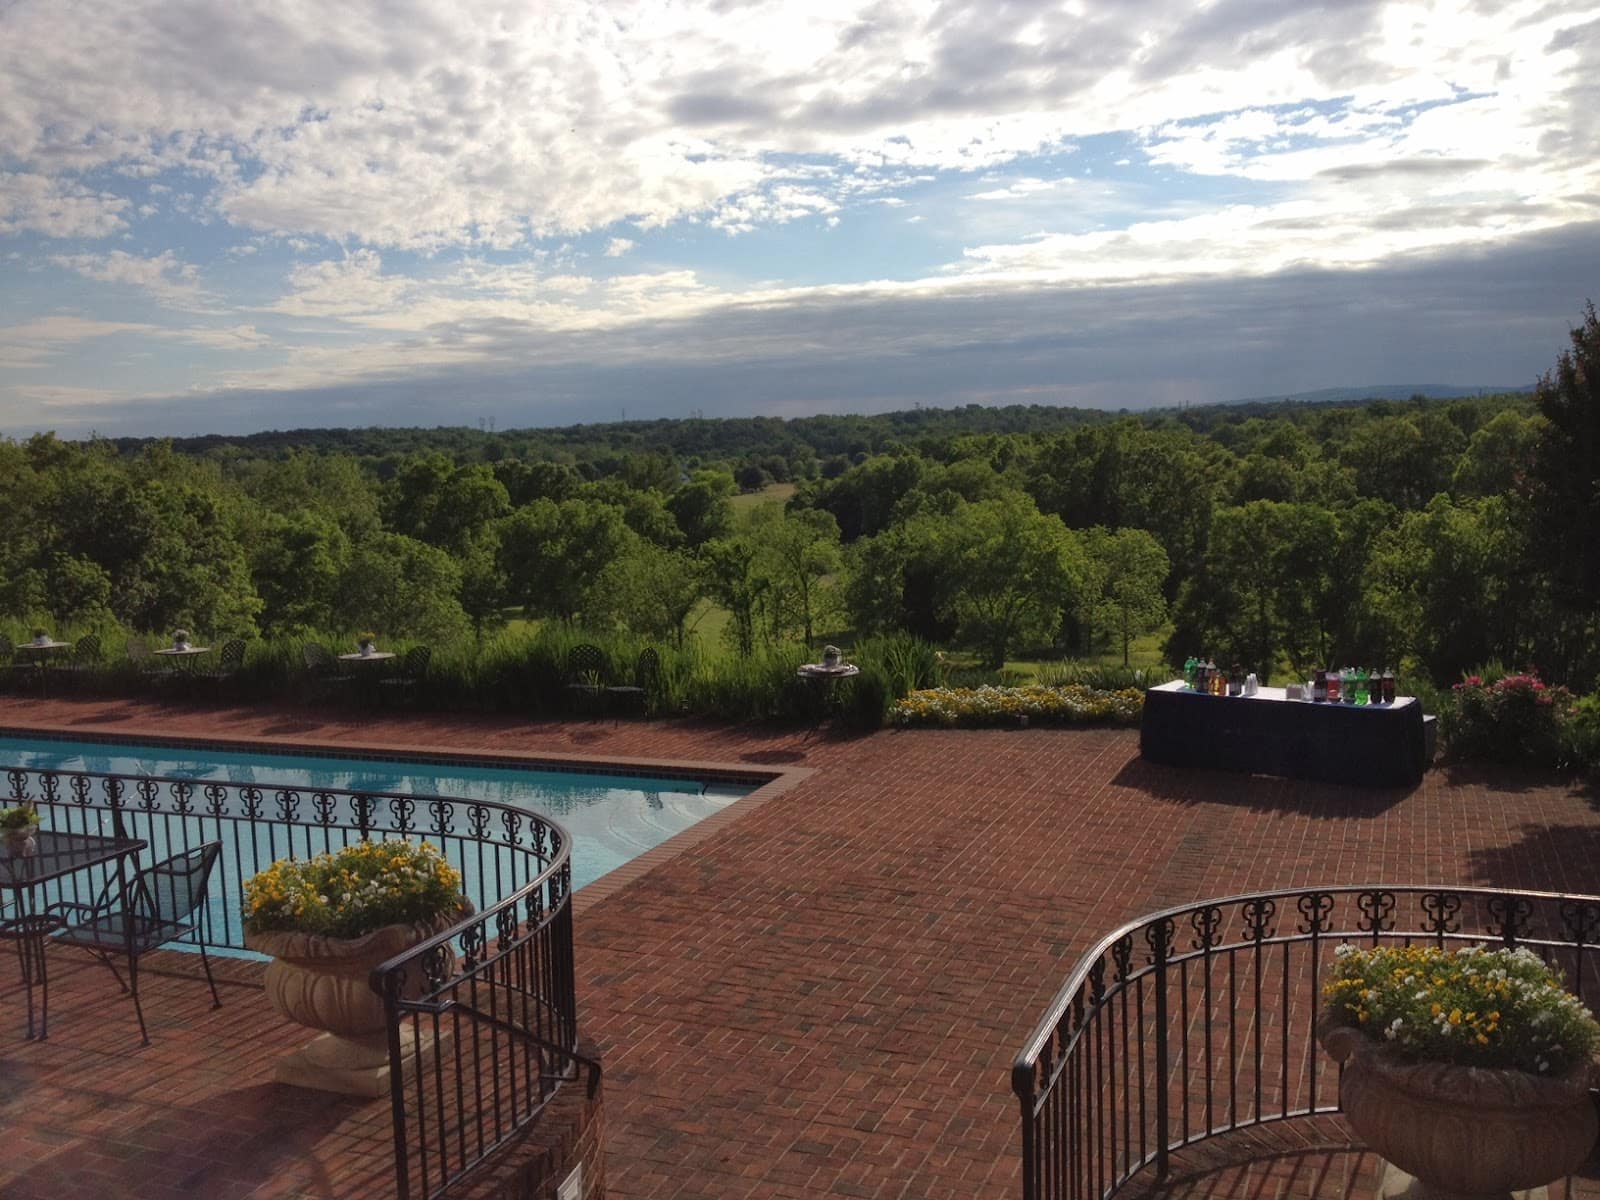  Weddings  with a View  Northern Virginia Caterer 